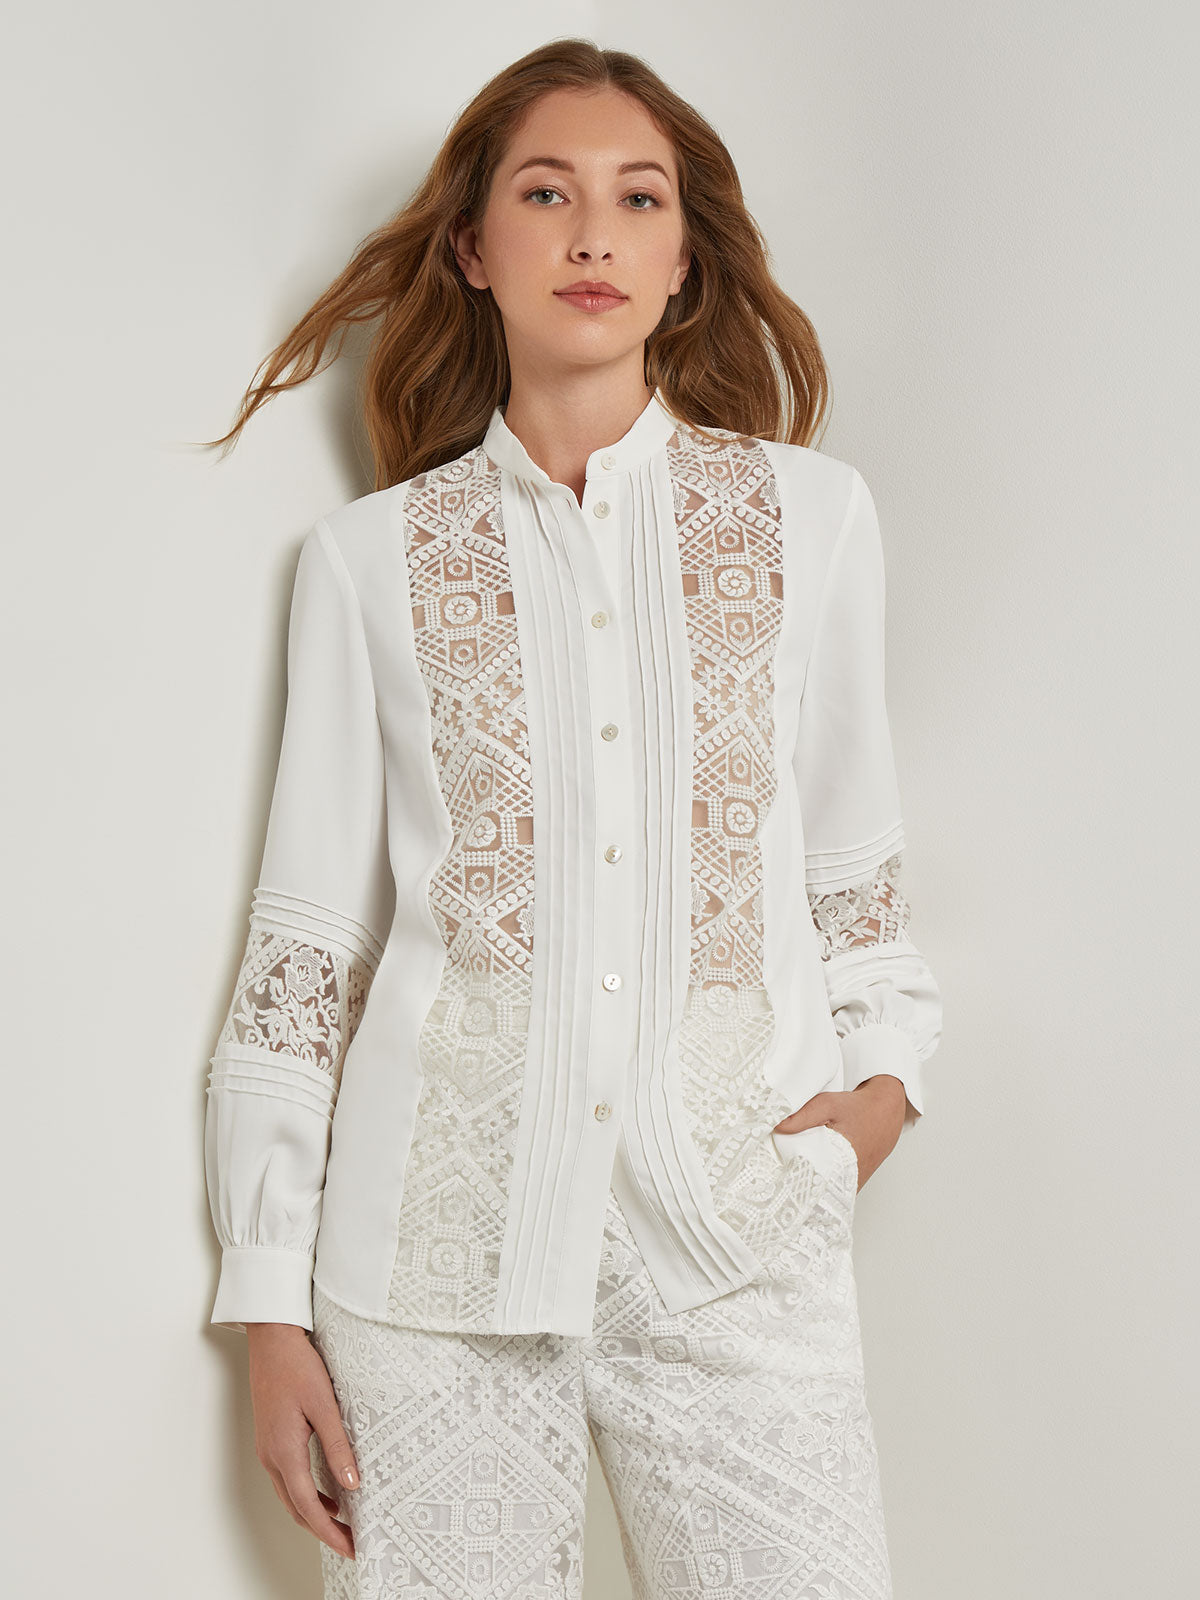 Women's Knit and Woven Blouses & Shirts | Misook